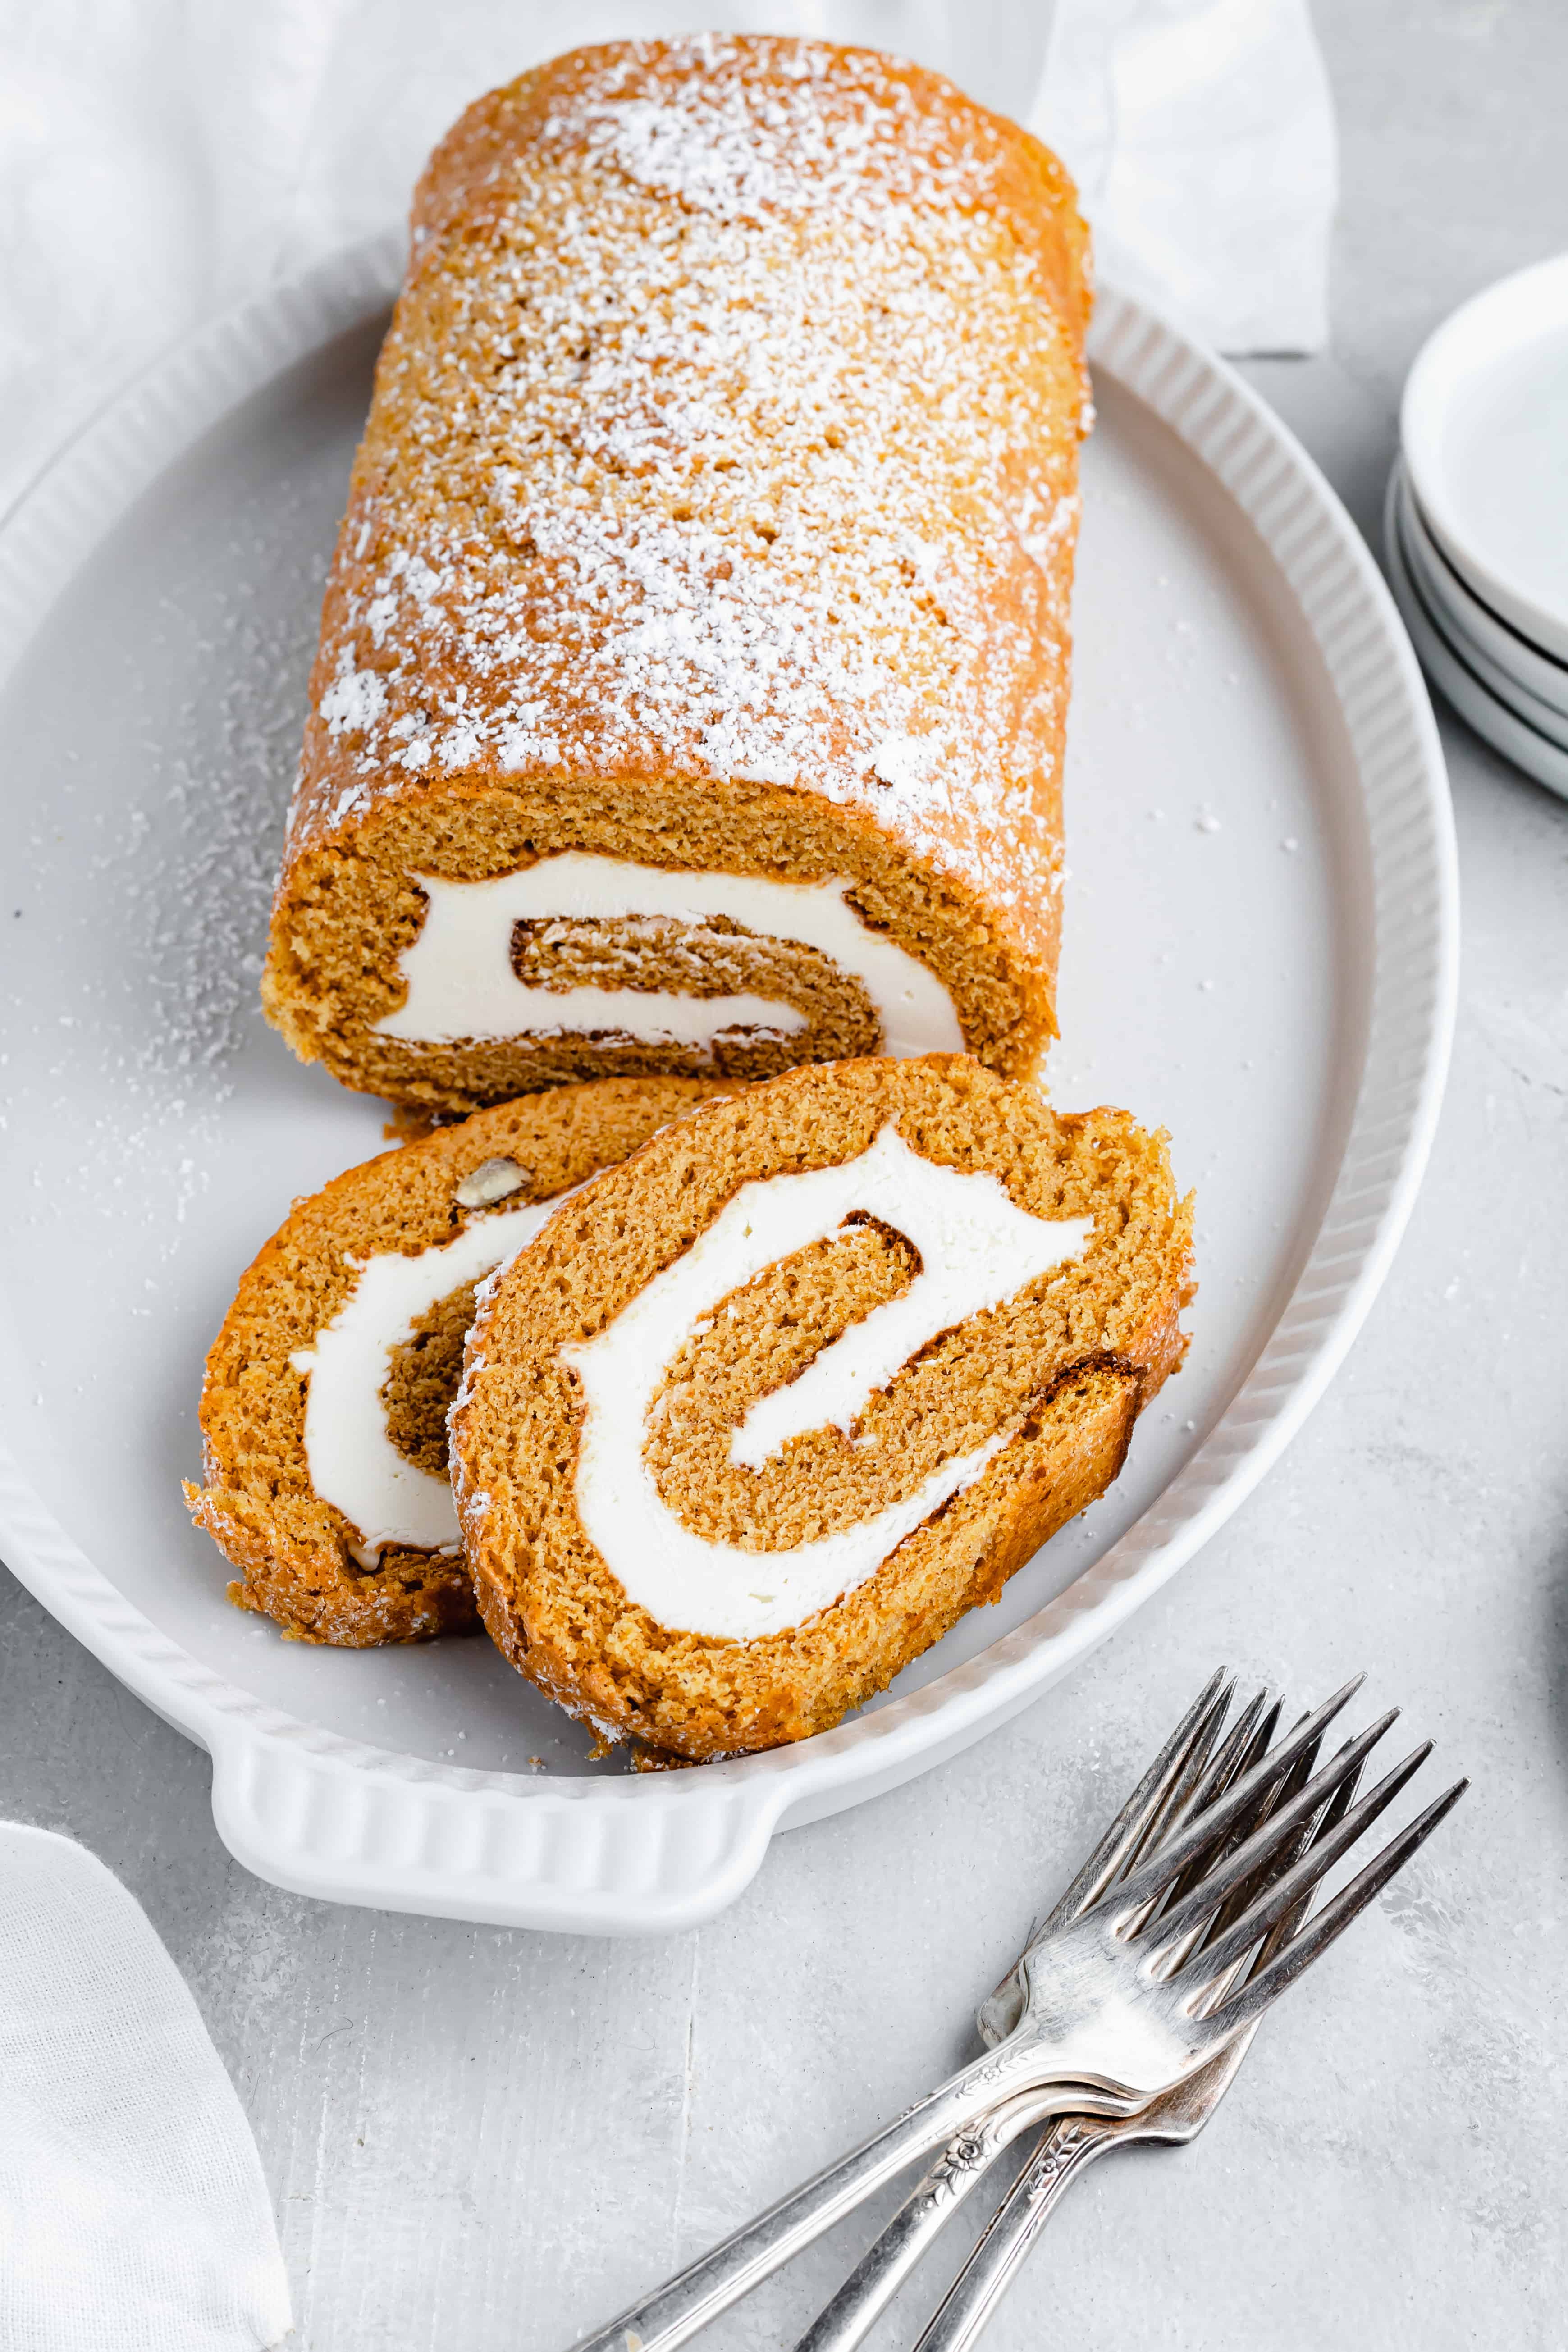 A pumpkin roll cake, dusted with powdered sugar, on a platter. Two slices have been cut and lie on the platter as well. Two forks are on the table nearby.